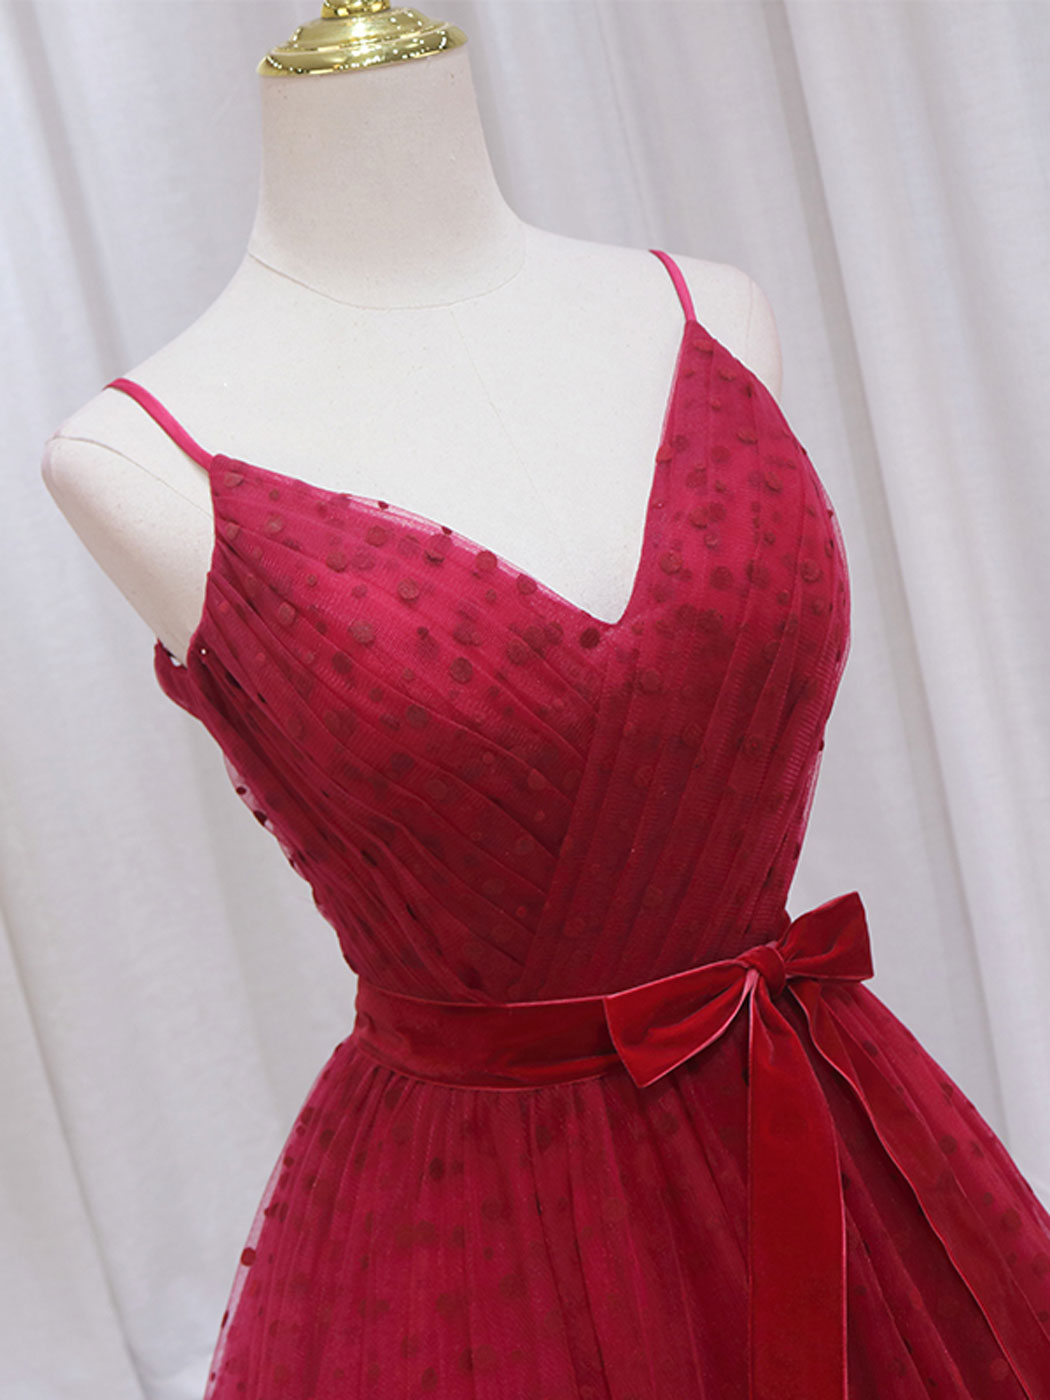 Red Spaghetti Strap Ball Gown Polka Dot Tulle Prom Dress Formal Dress - DollyGown